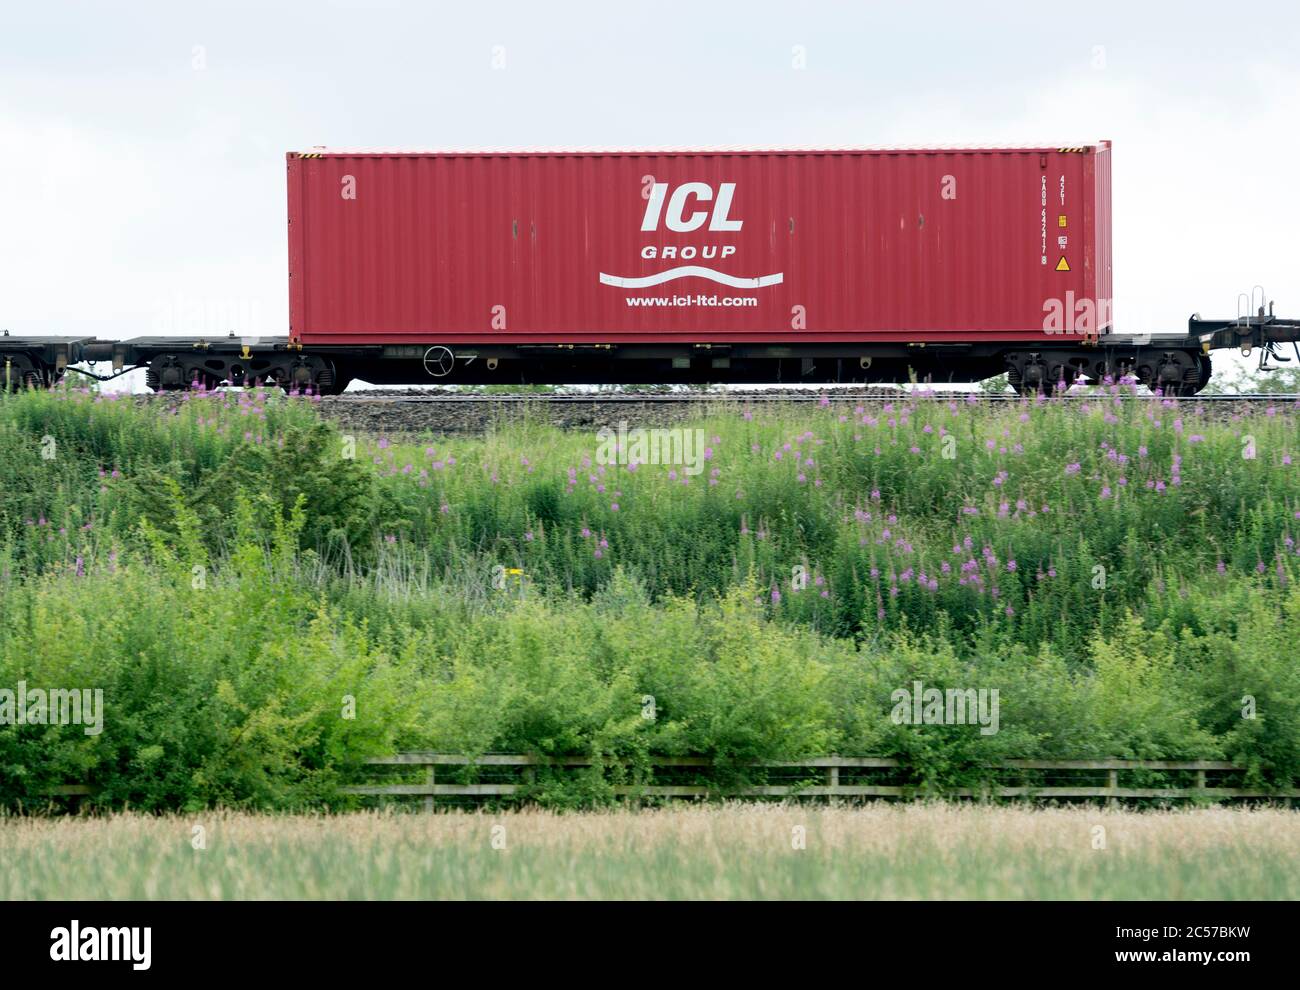 ICL Group shipping container on a freightliner train, Warwickshire, UK Stock Photo